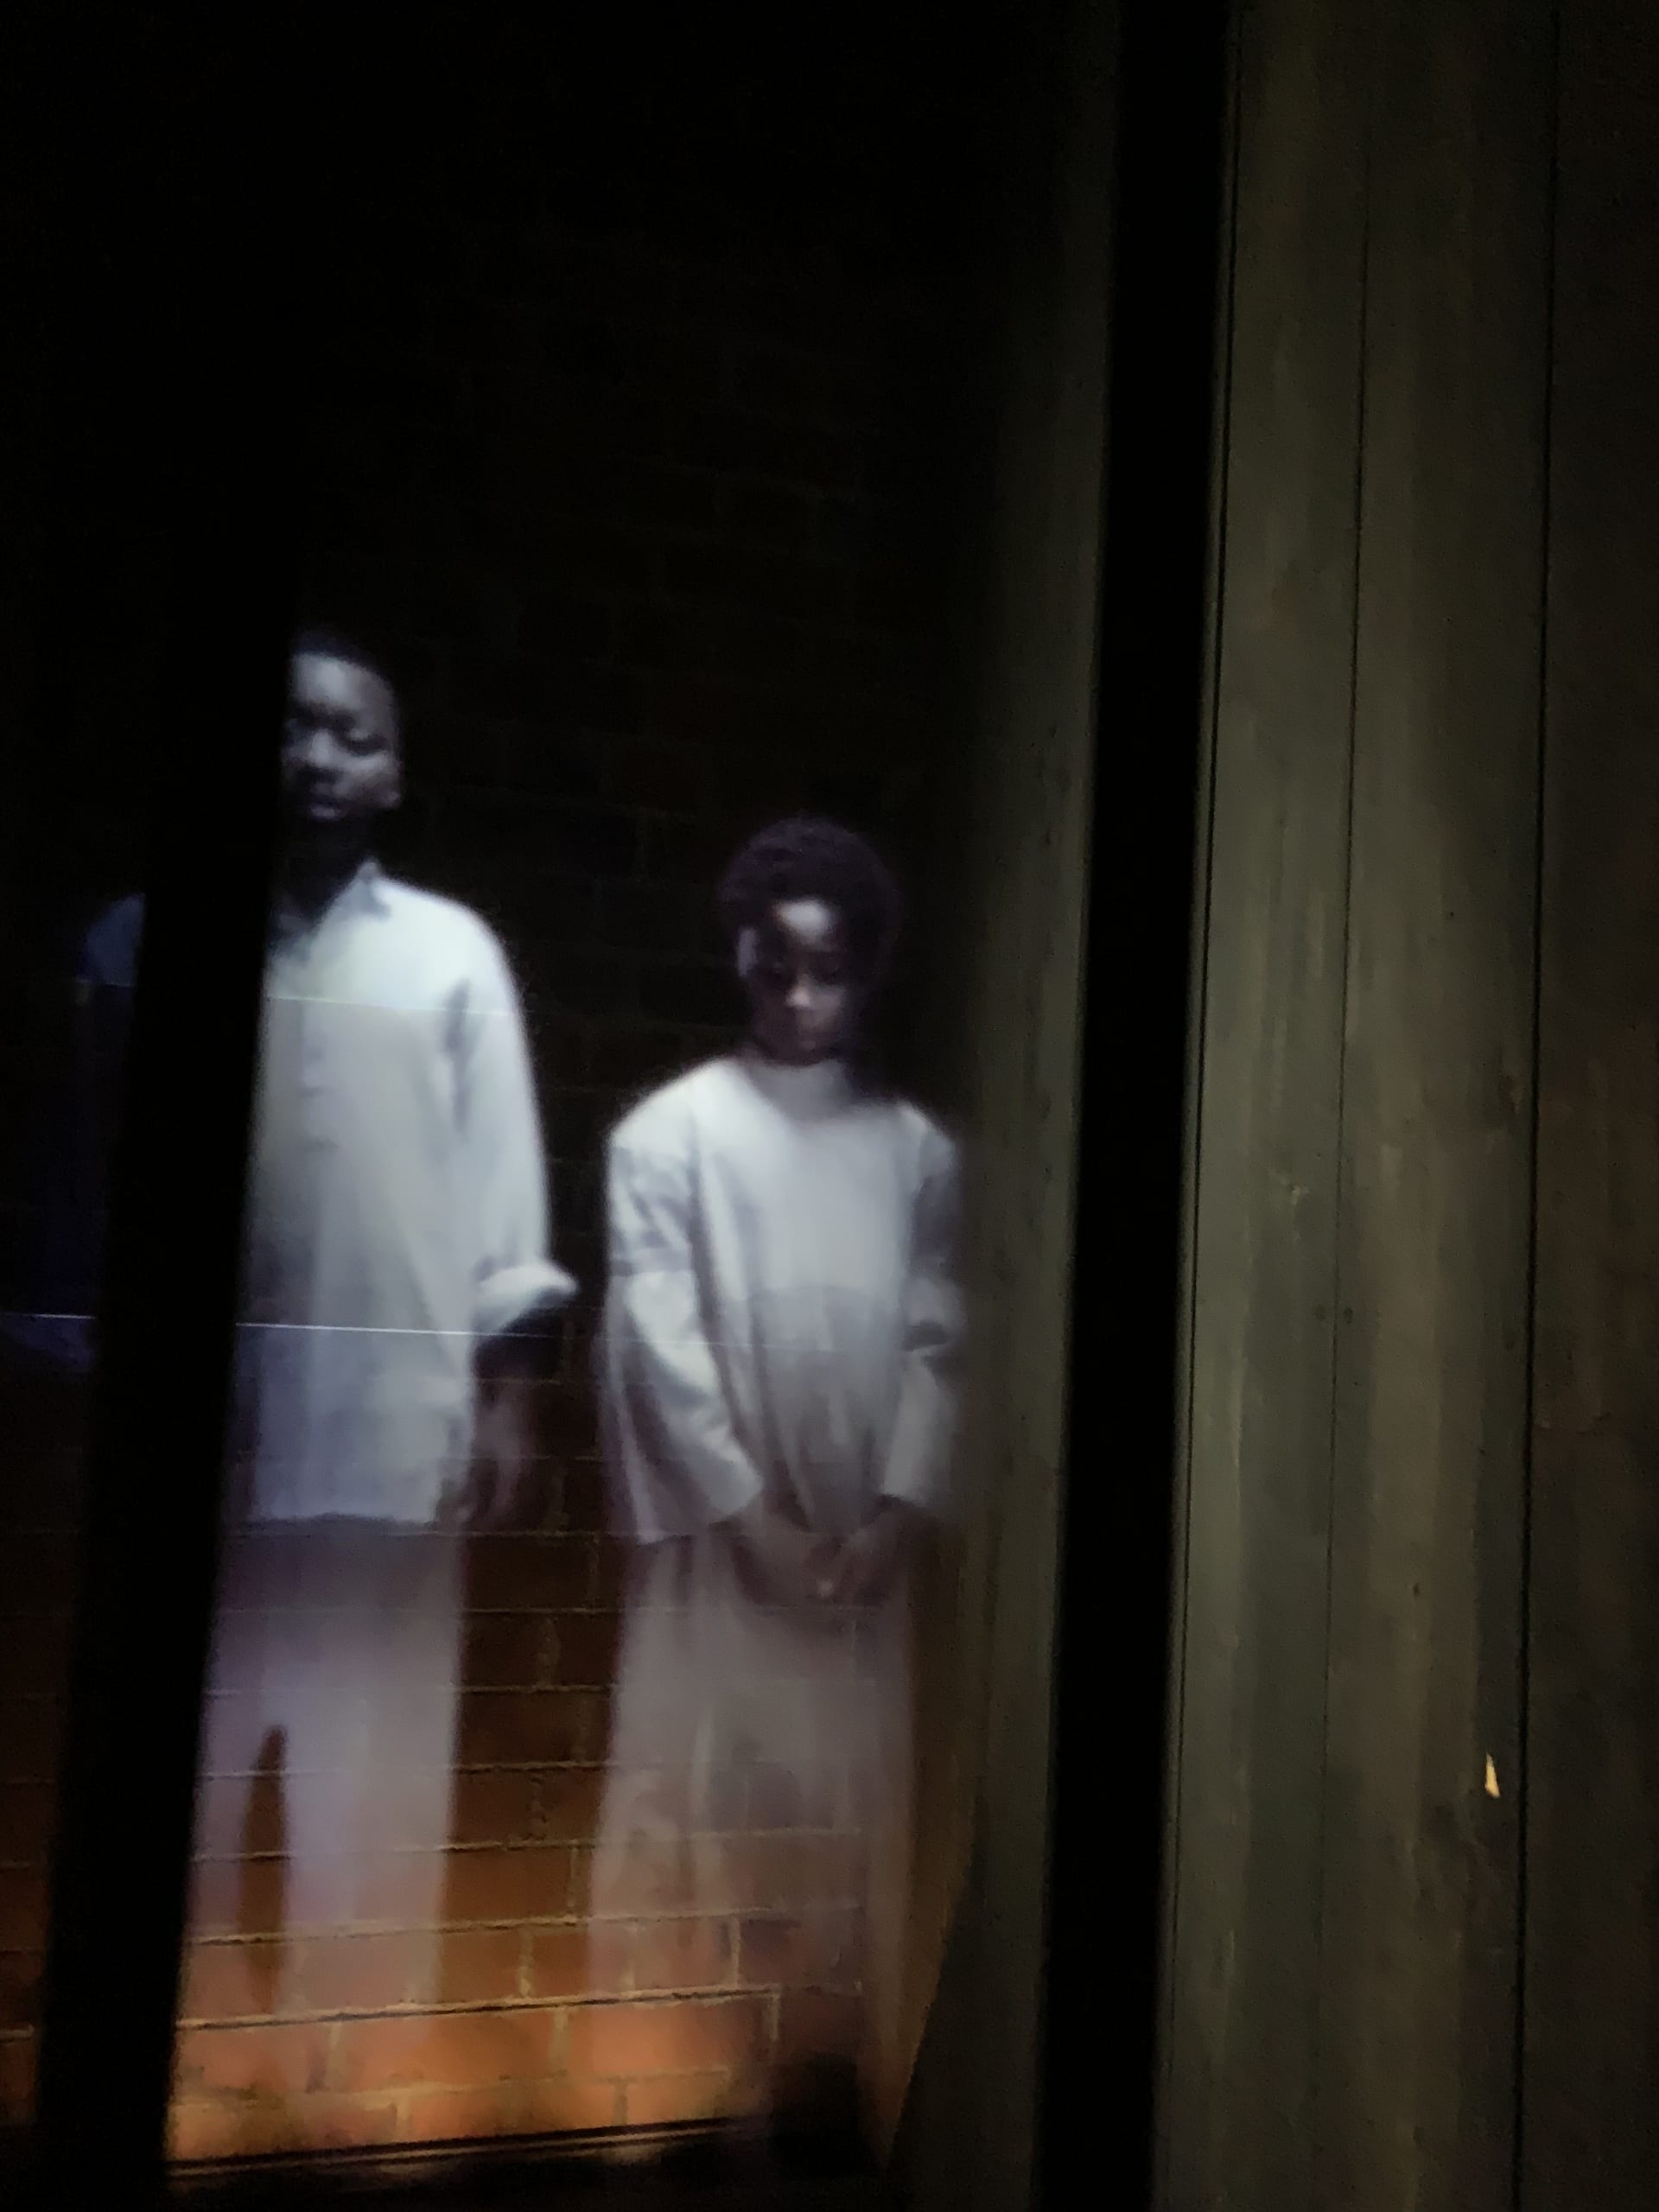 opening installations of holograms with voices speaking accounts of slaves in holding cells before auction